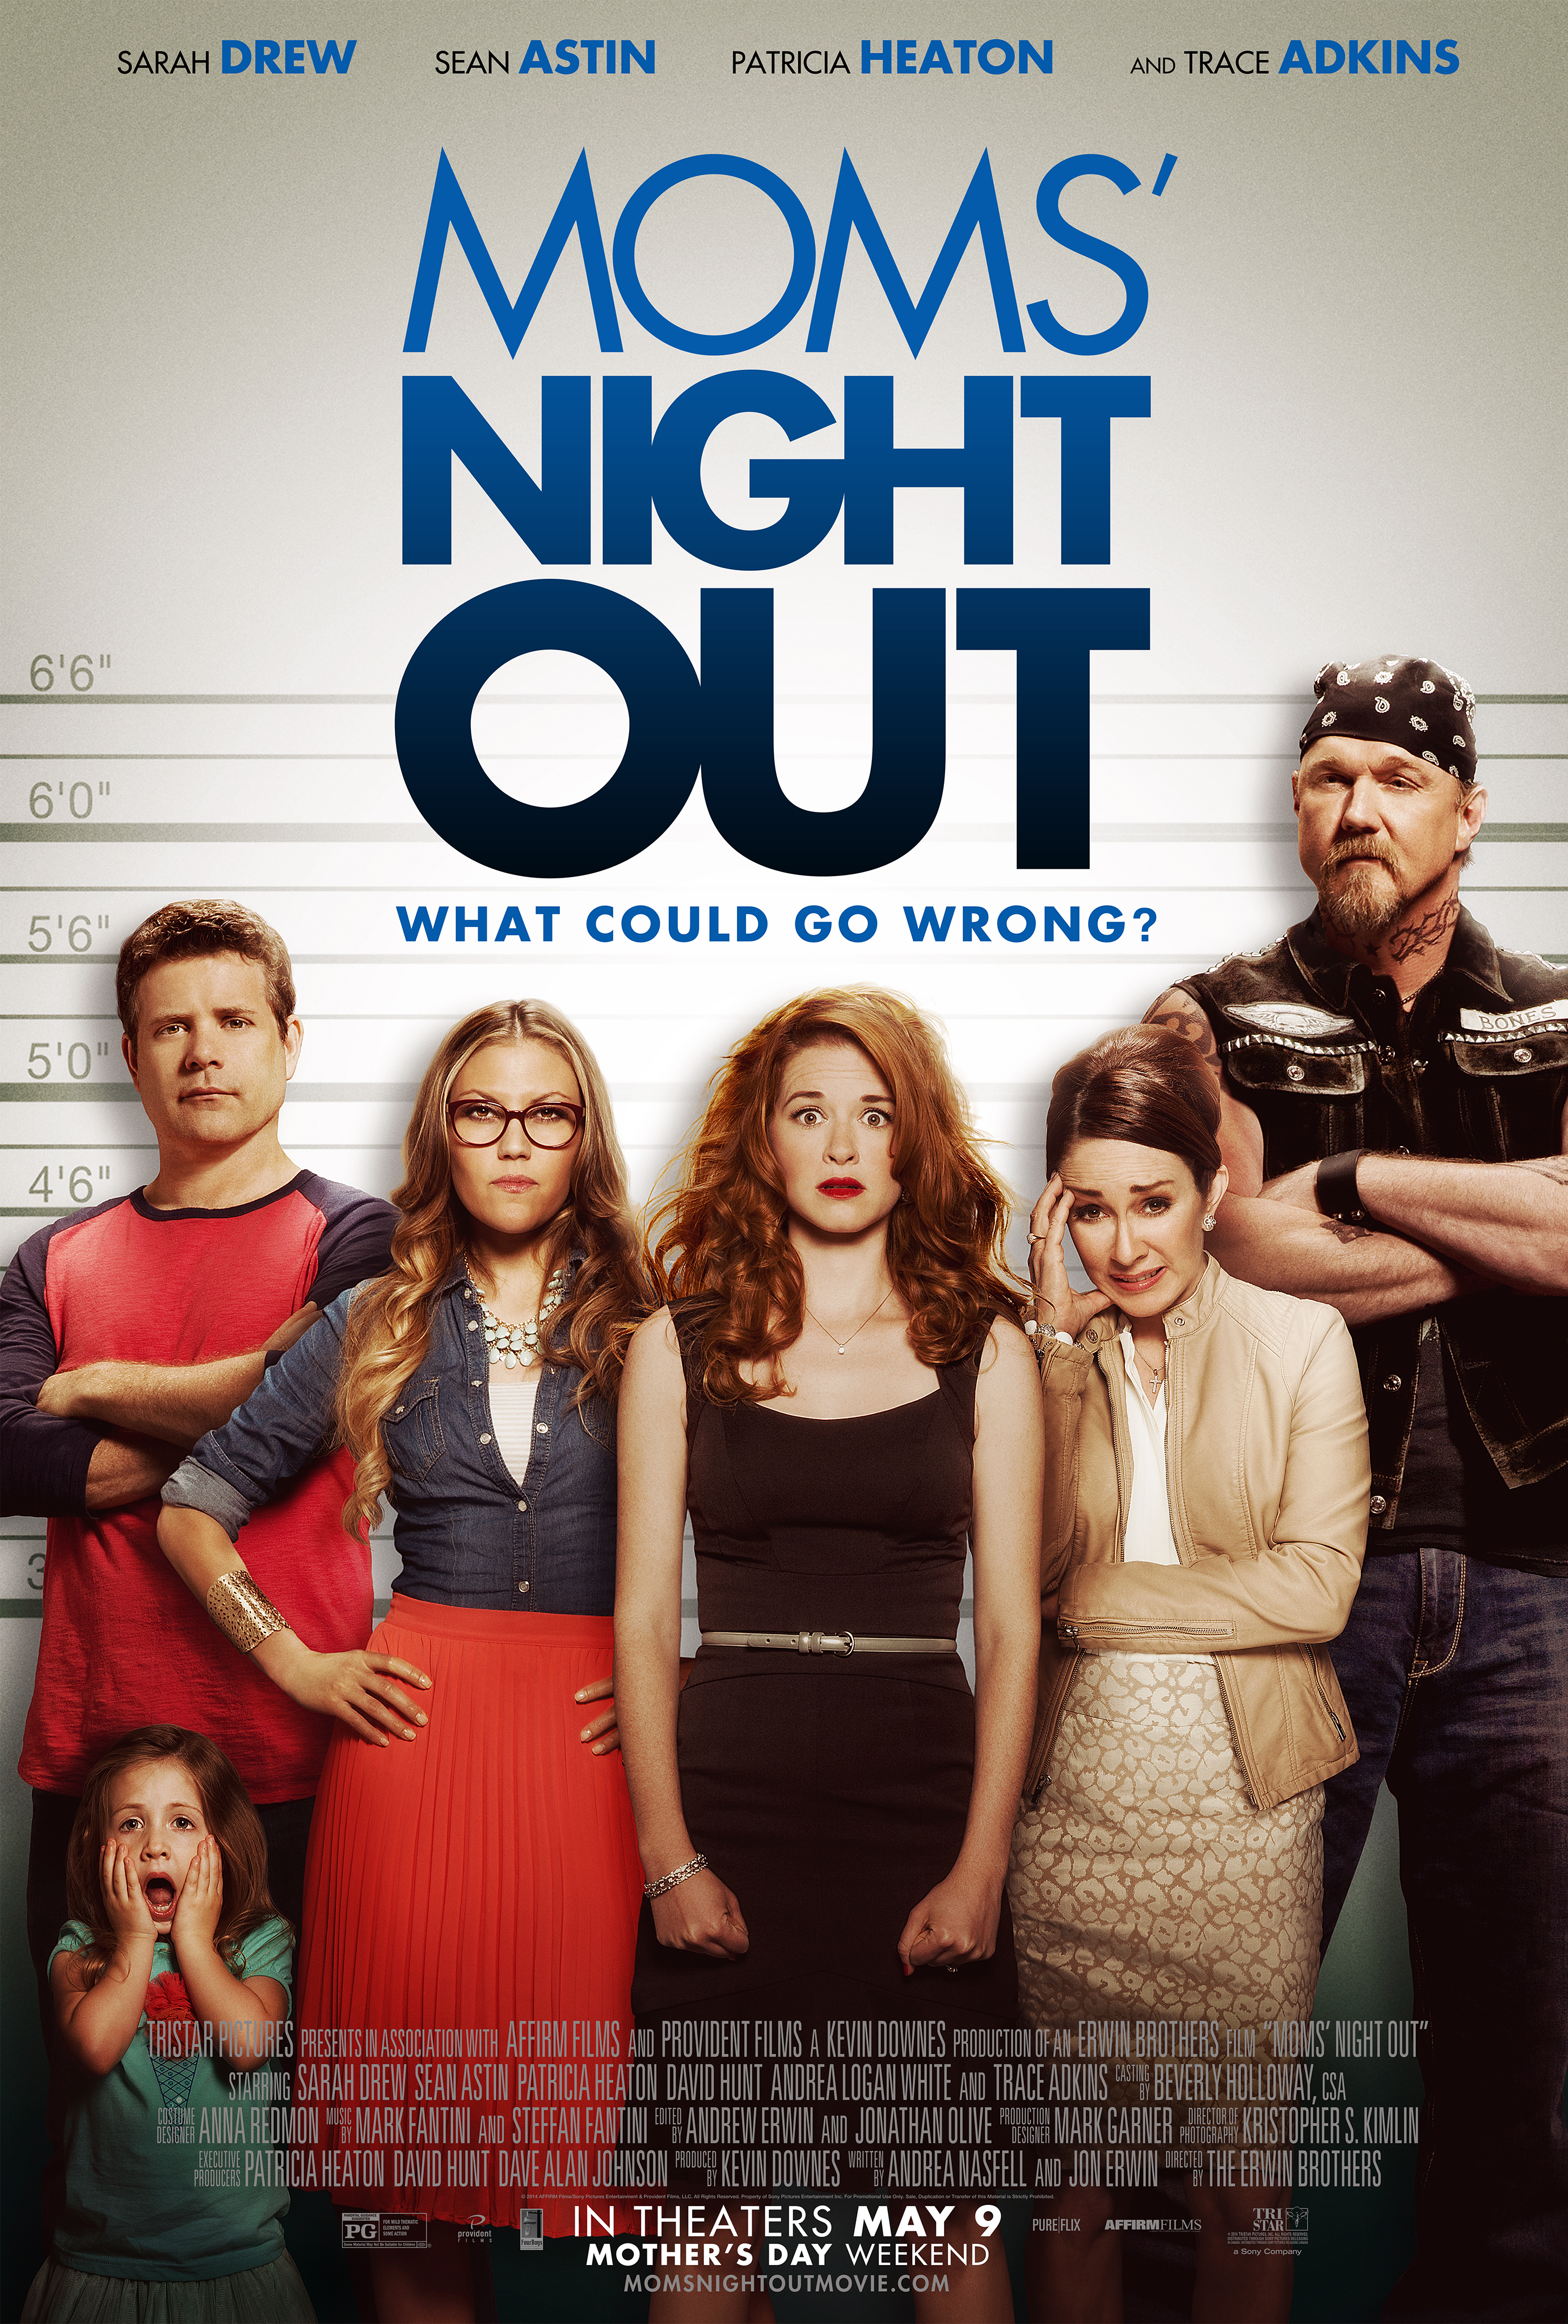 Sean Astin, Patricia Heaton, Trace Adkins and Sarah Drew in Moms' Night Out (2014)